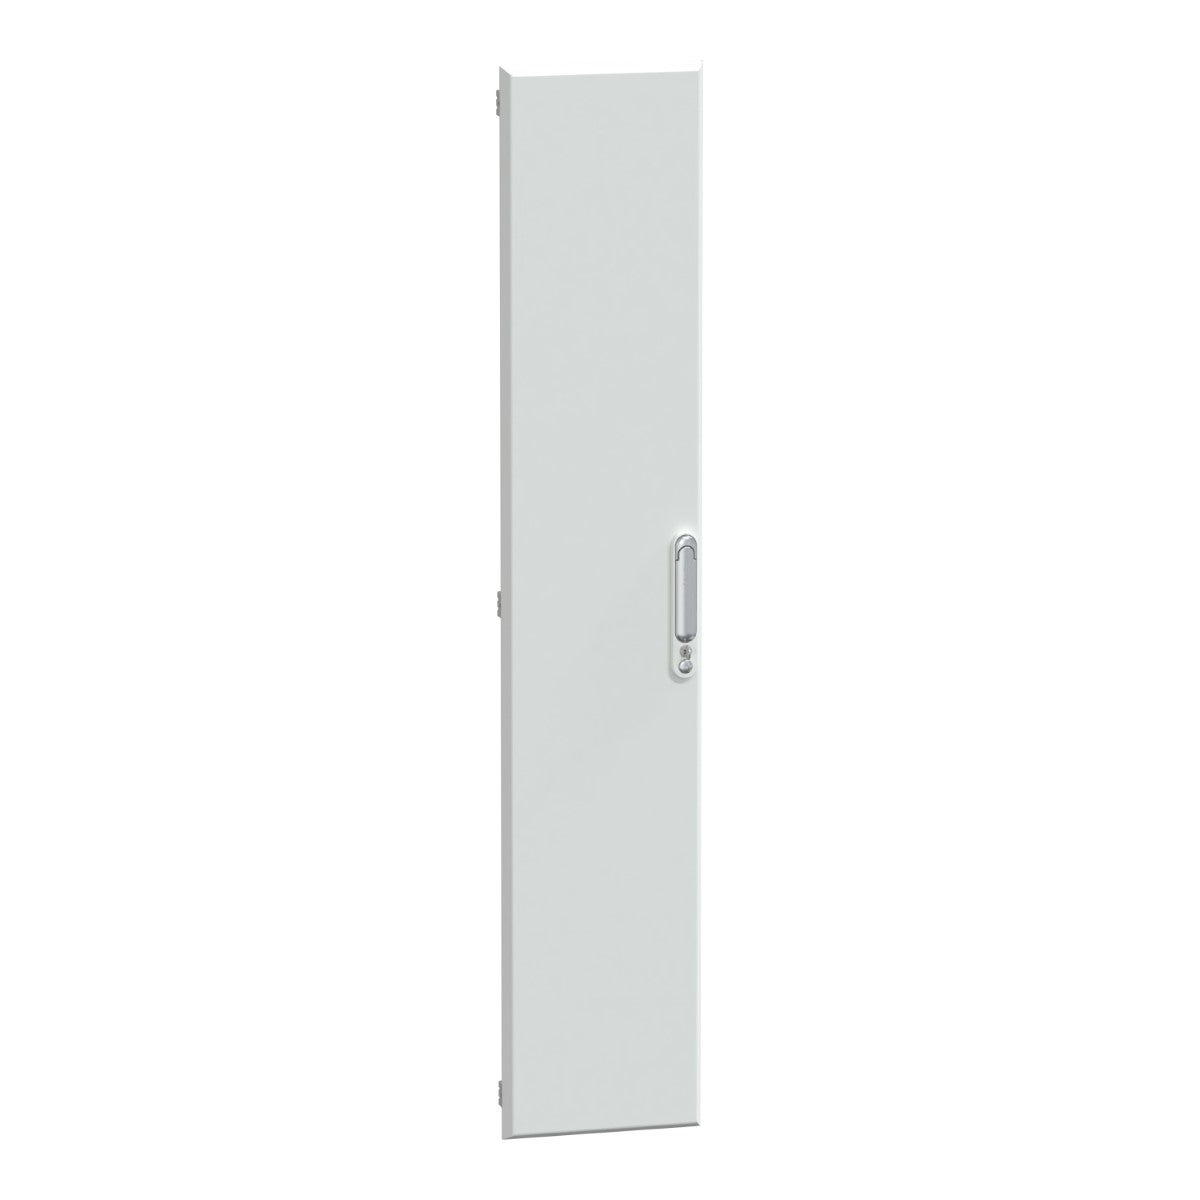 Door, PrismaSeT G, plain type for duct, 30M, W300, IP30, white, RAL 9003